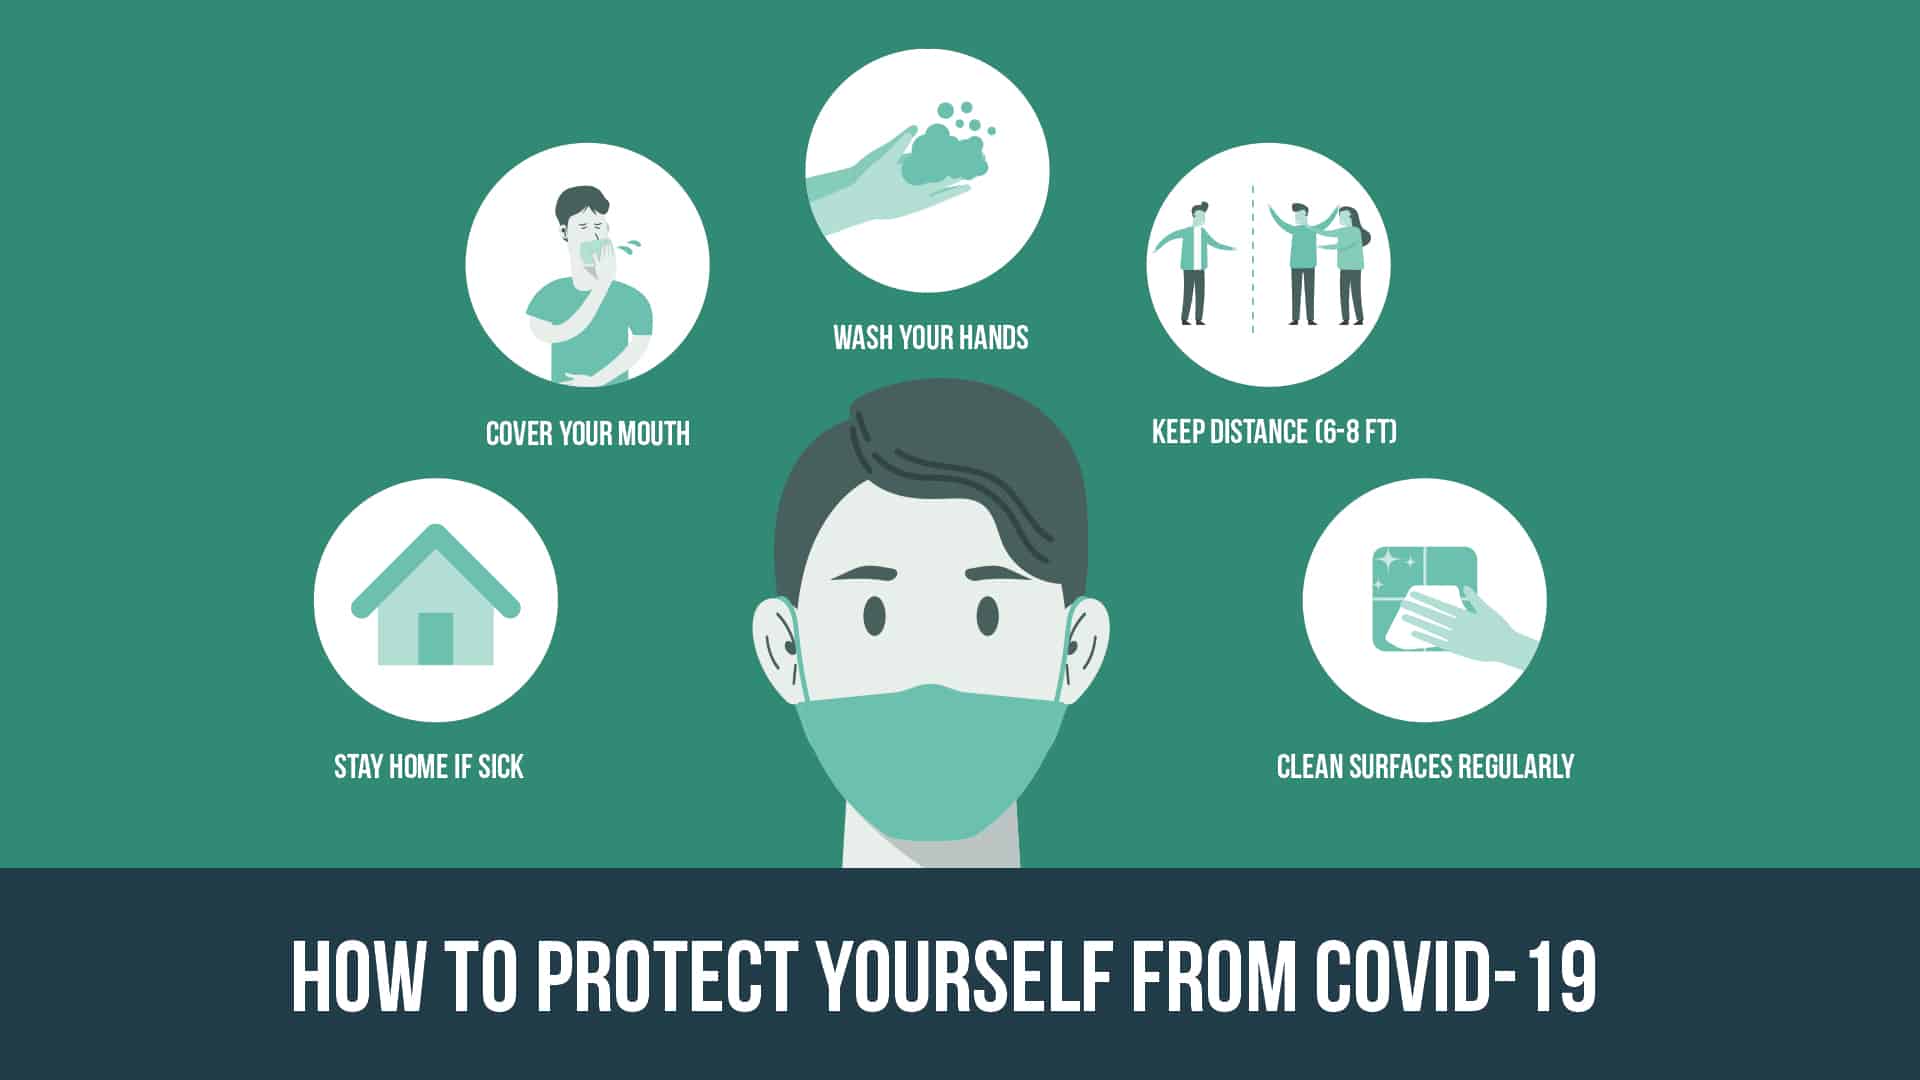 SOA - How to Protect Yourself from Covid-19 16 x 9 Decal - 2 pack